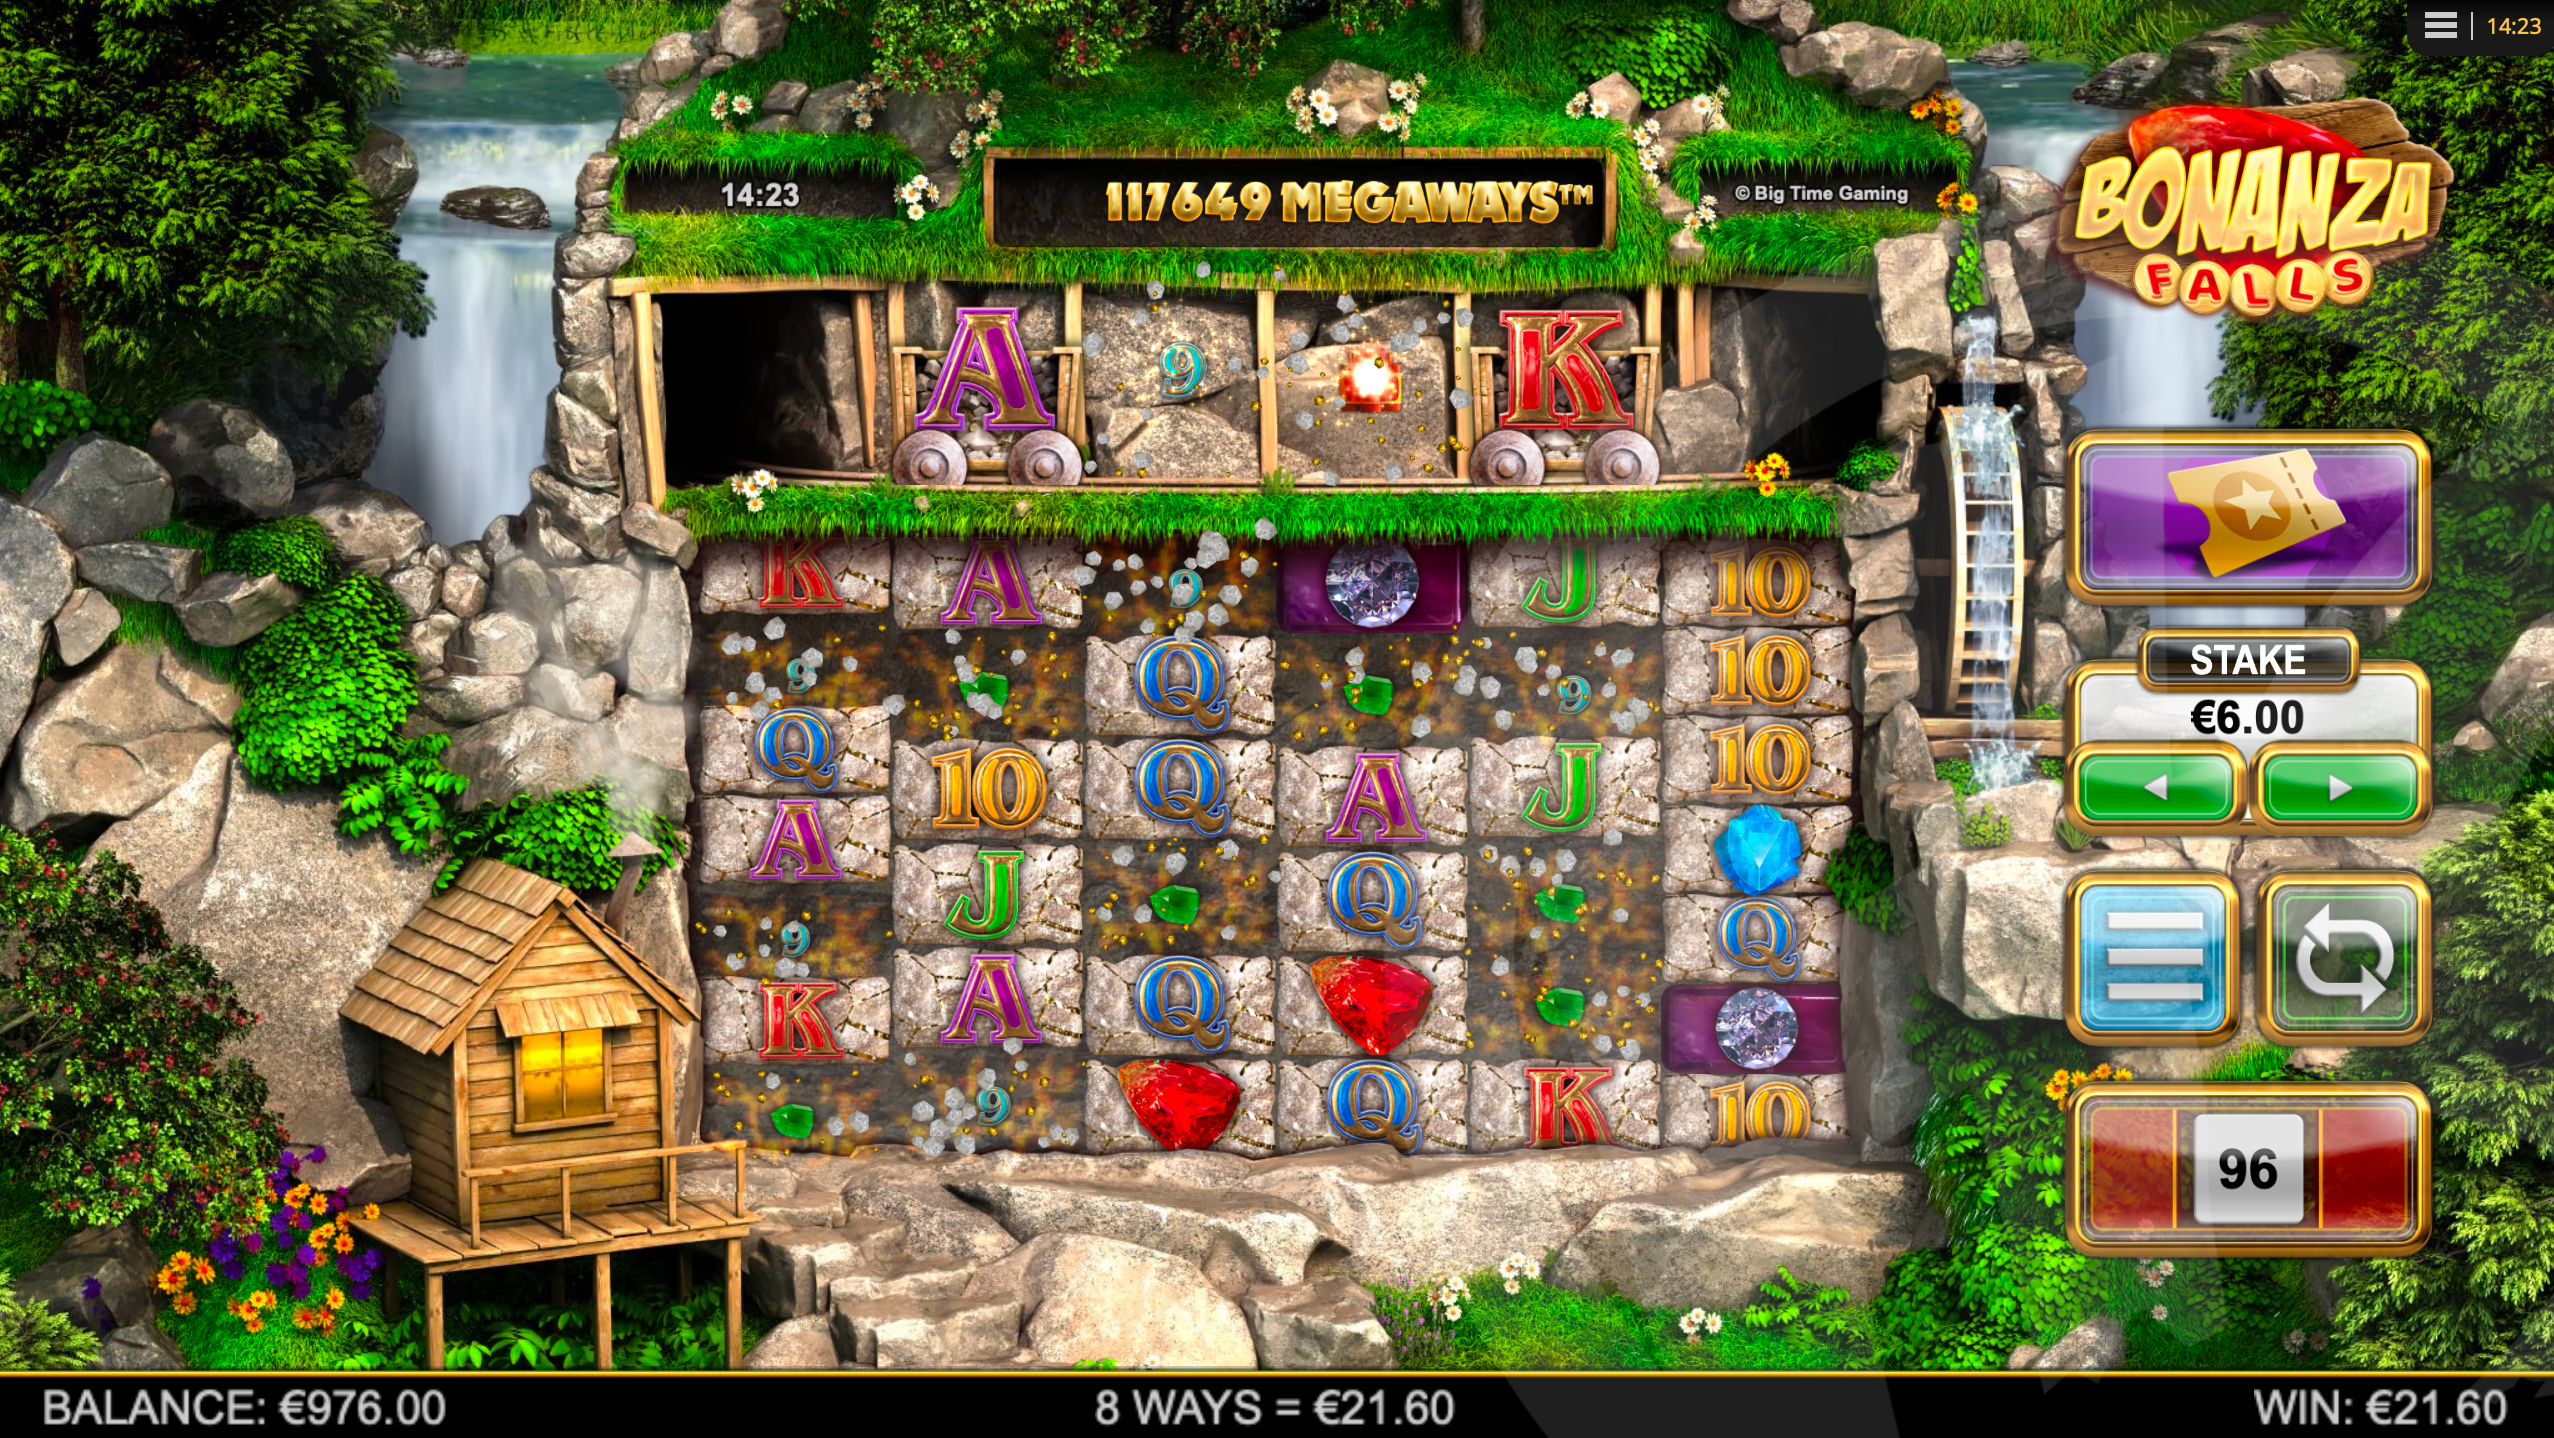 Bonanza Falls Offers Players up to 117,649 Ways to Win